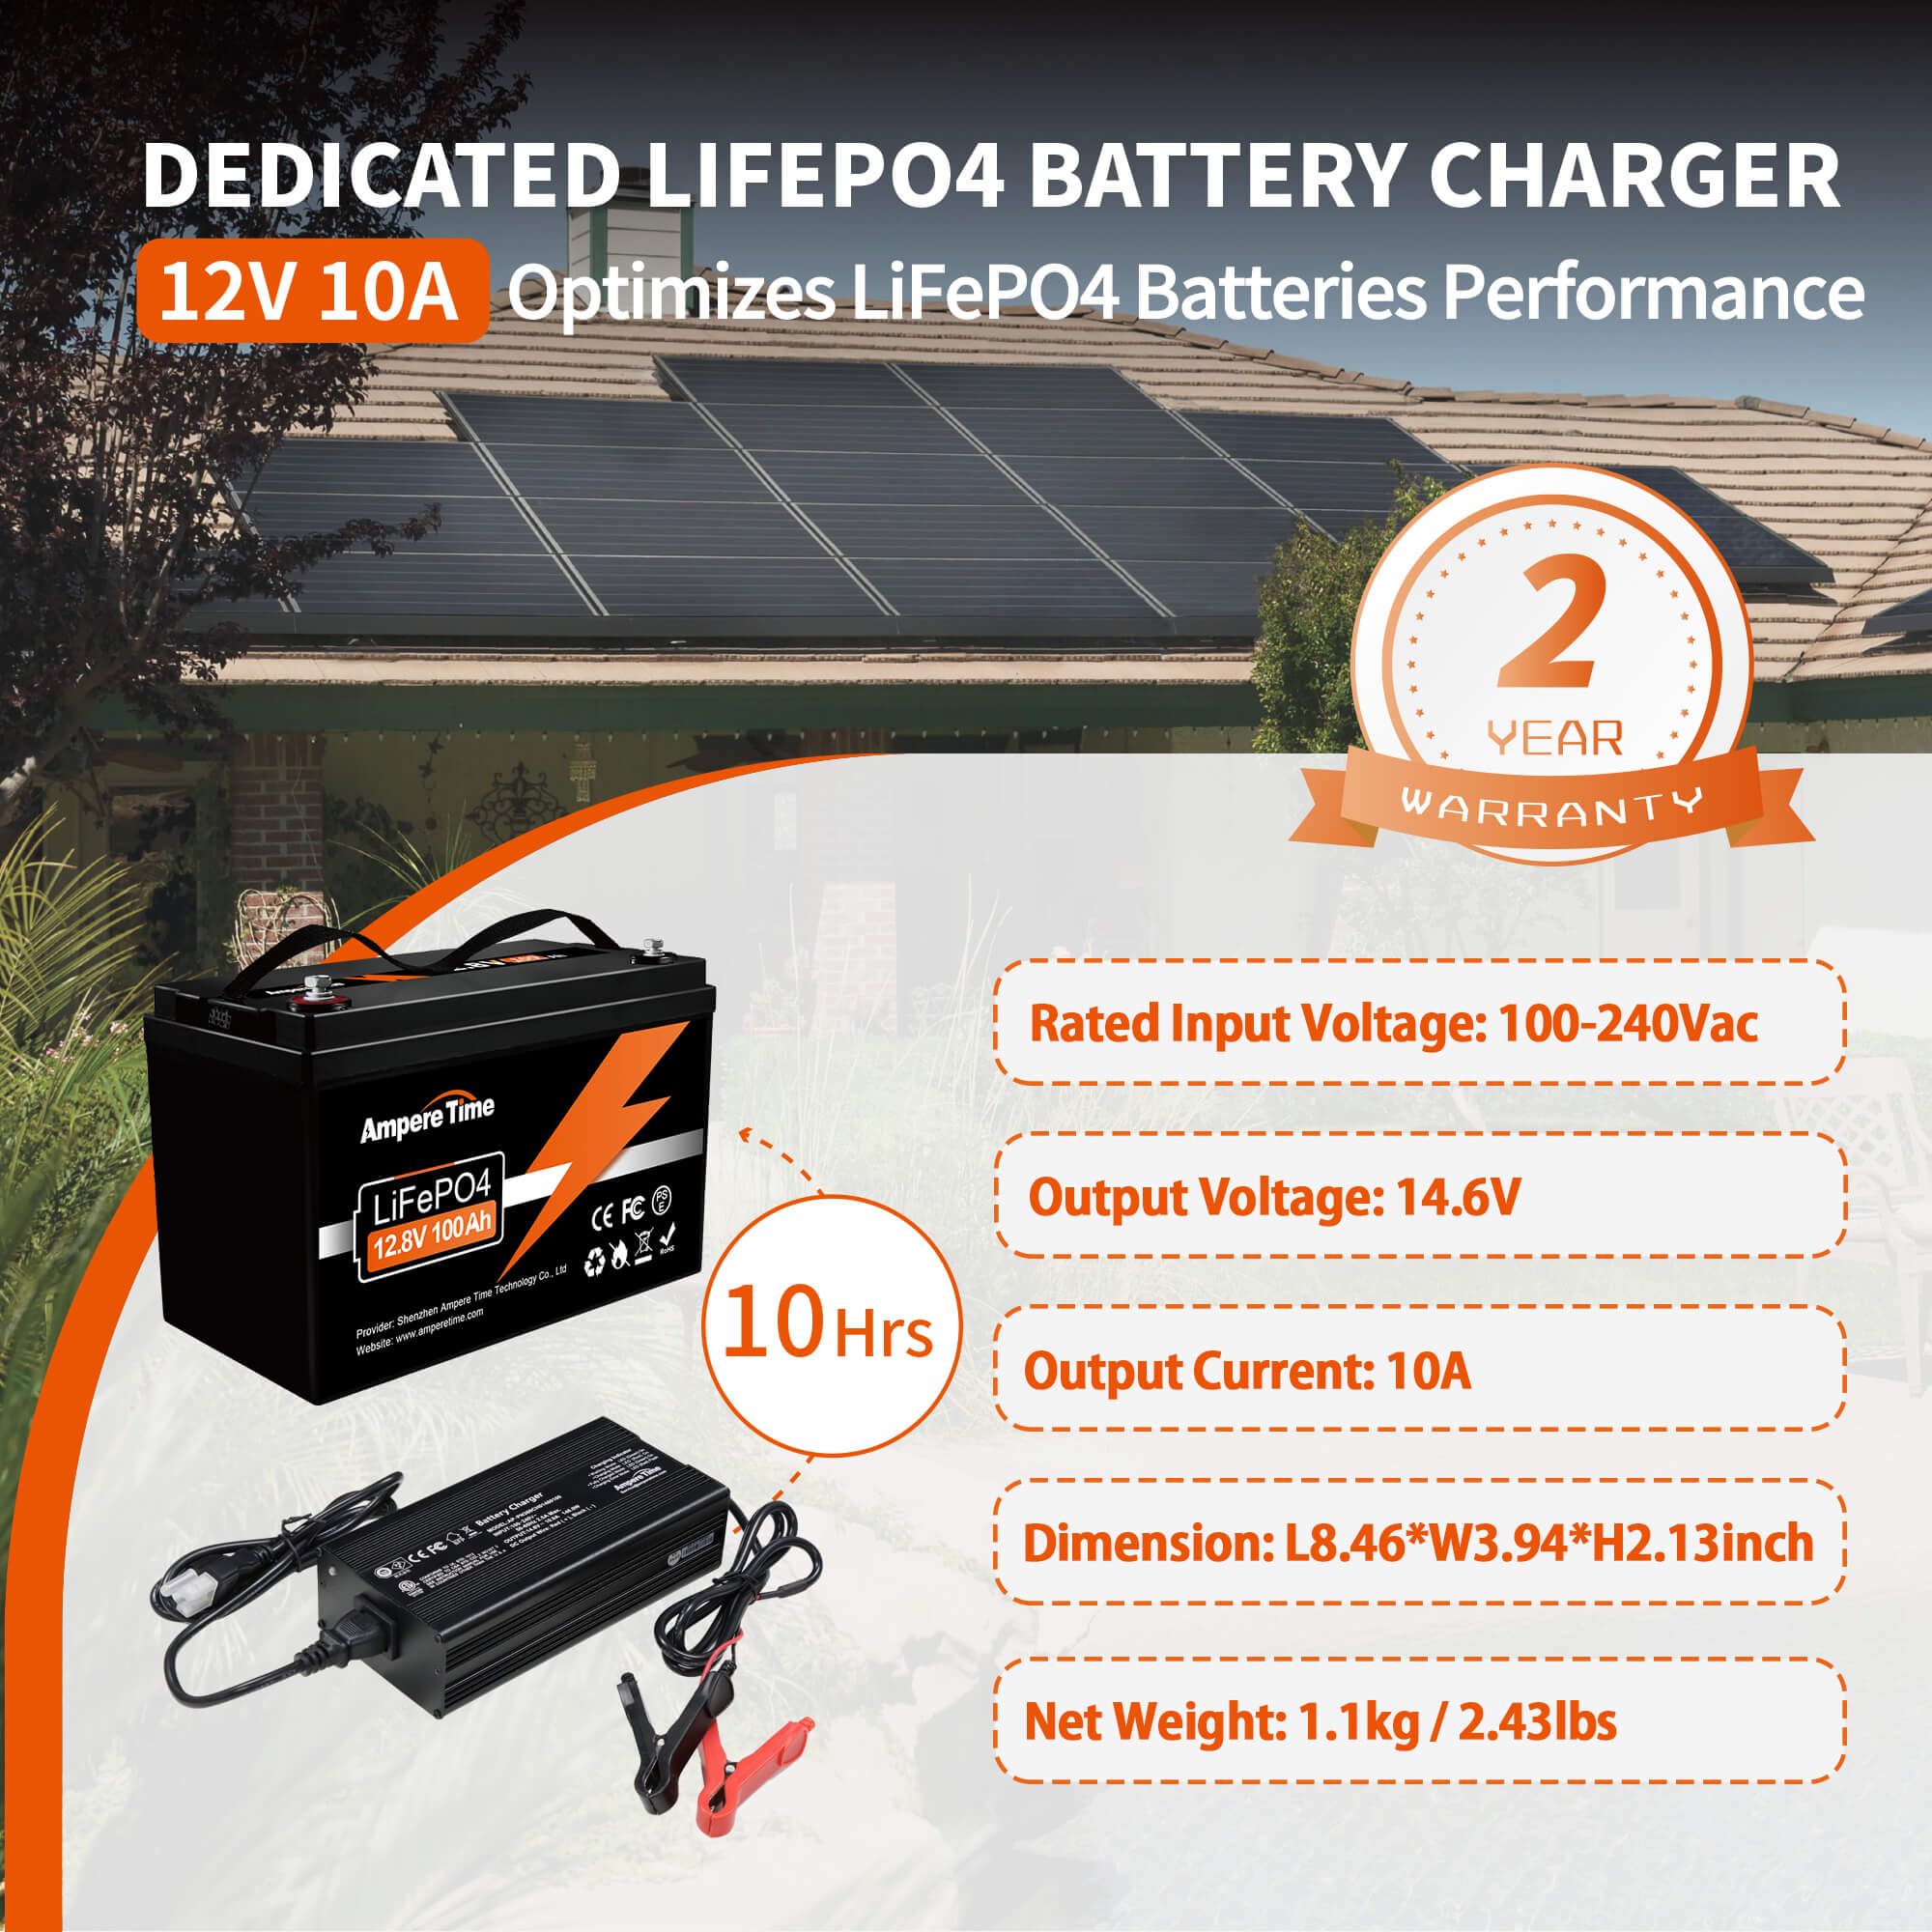 Ampere Time 14.6V 10A, Intelligent AC-DC Battery Charger Ampere Time